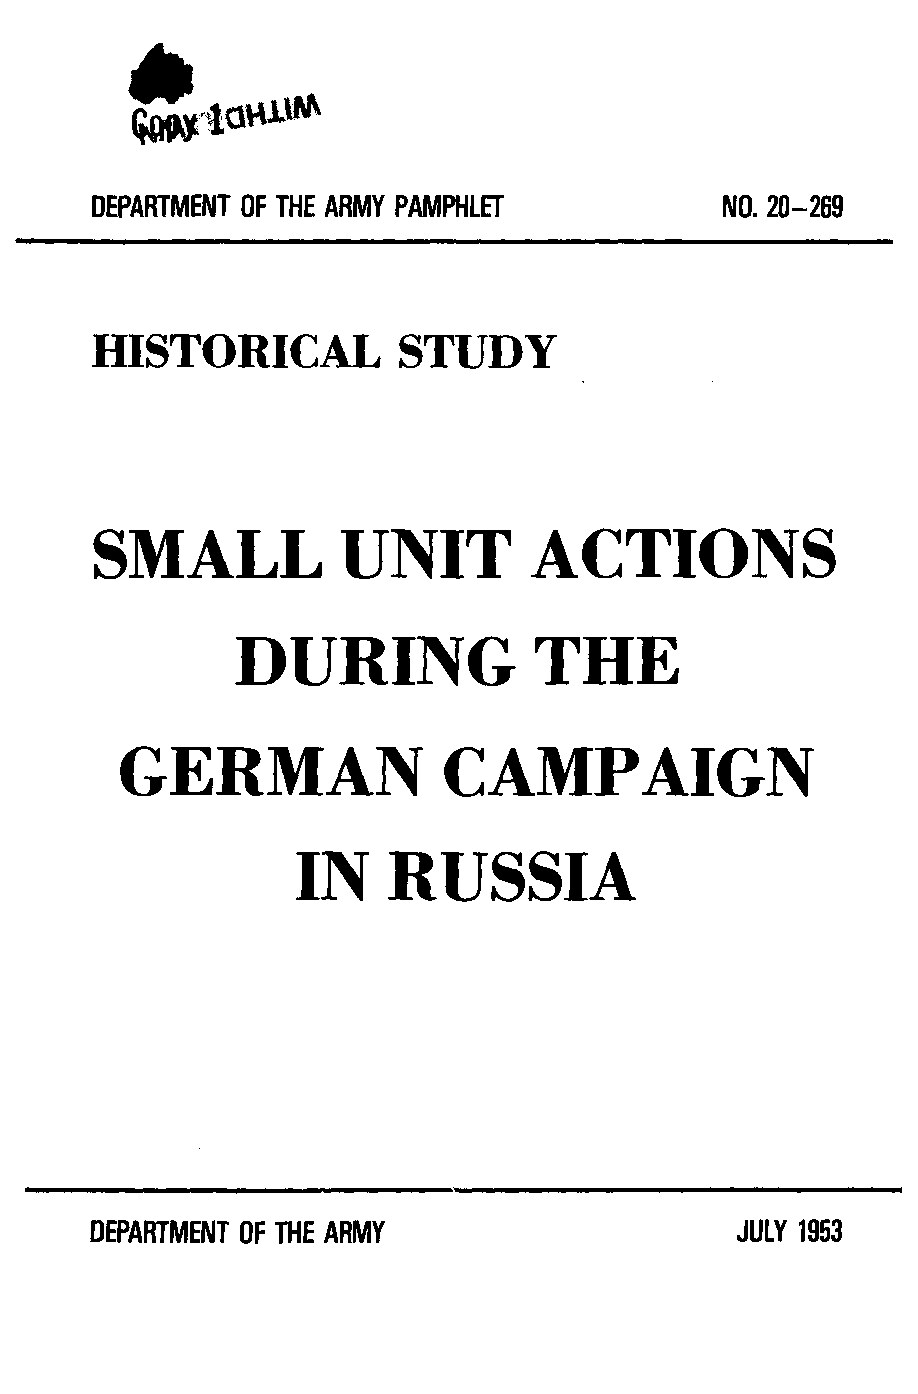 Small Unit Actions during the German Campaign in Russia